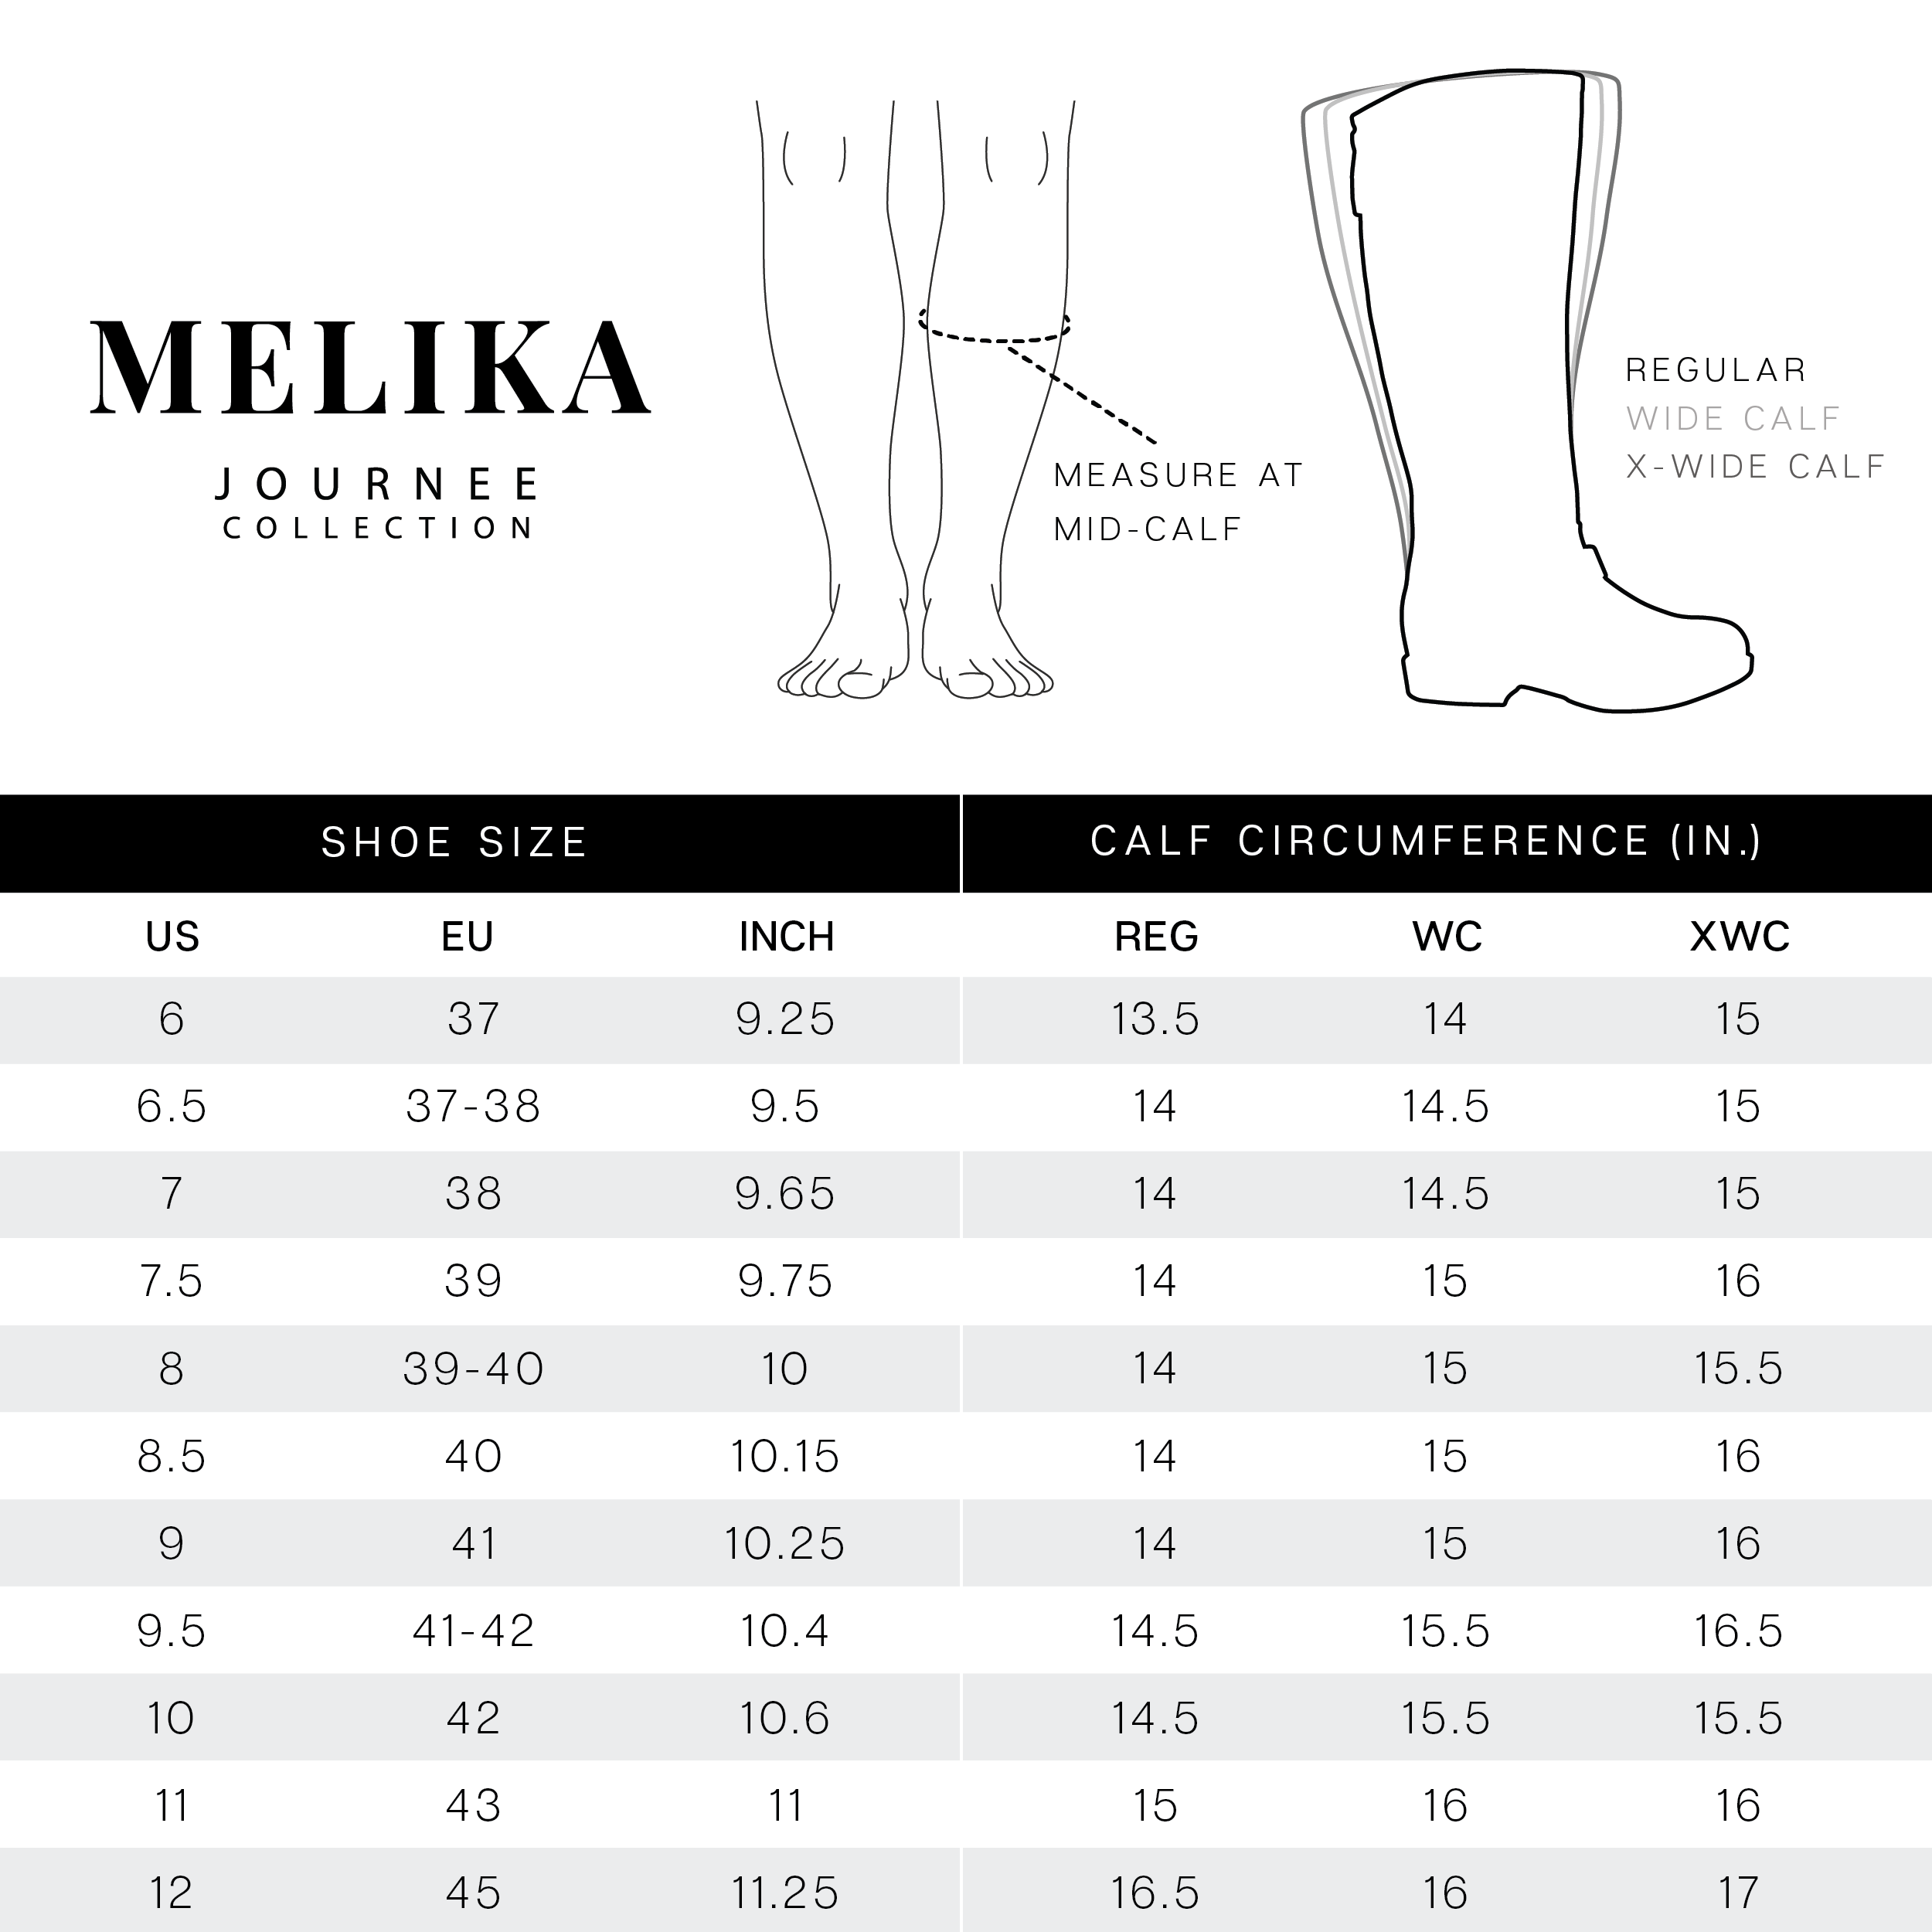 MELIKA EXTRA WIDE CALF - Journee Collection